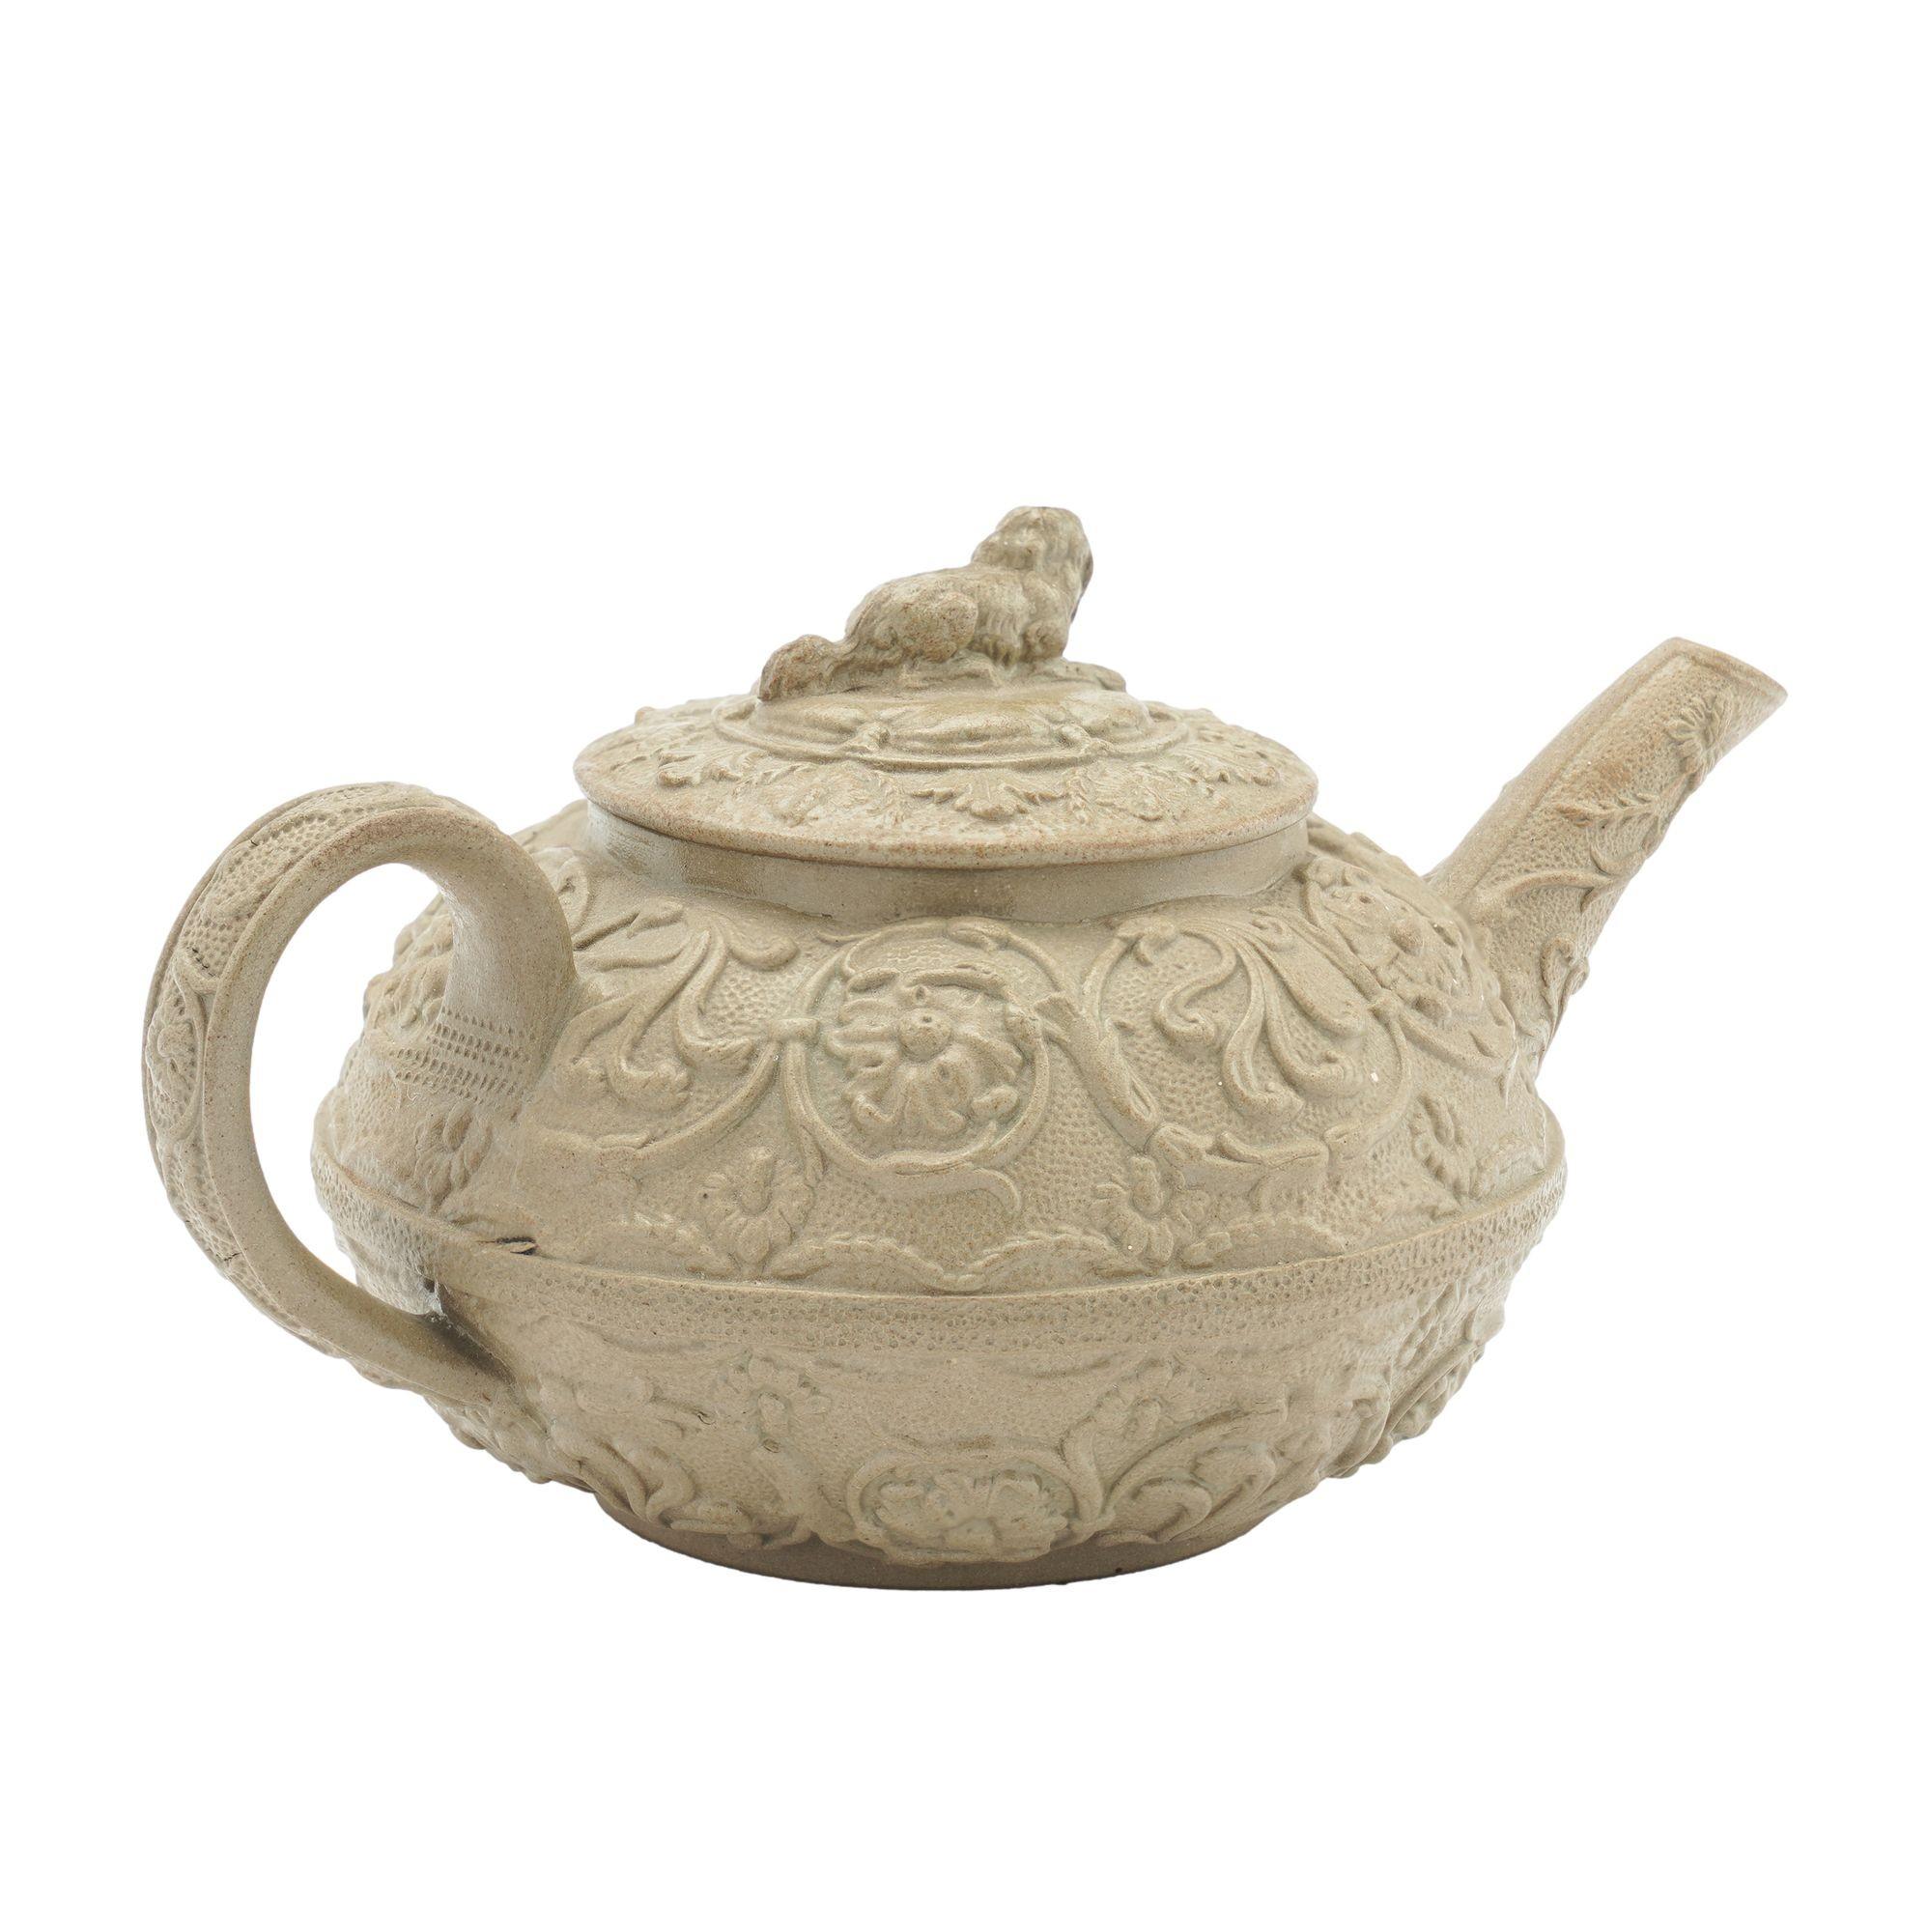 Stoneware tea pot with spaniel lid finial by Wedgwood, c. 1829 In Good Condition For Sale In Kenilworth, IL